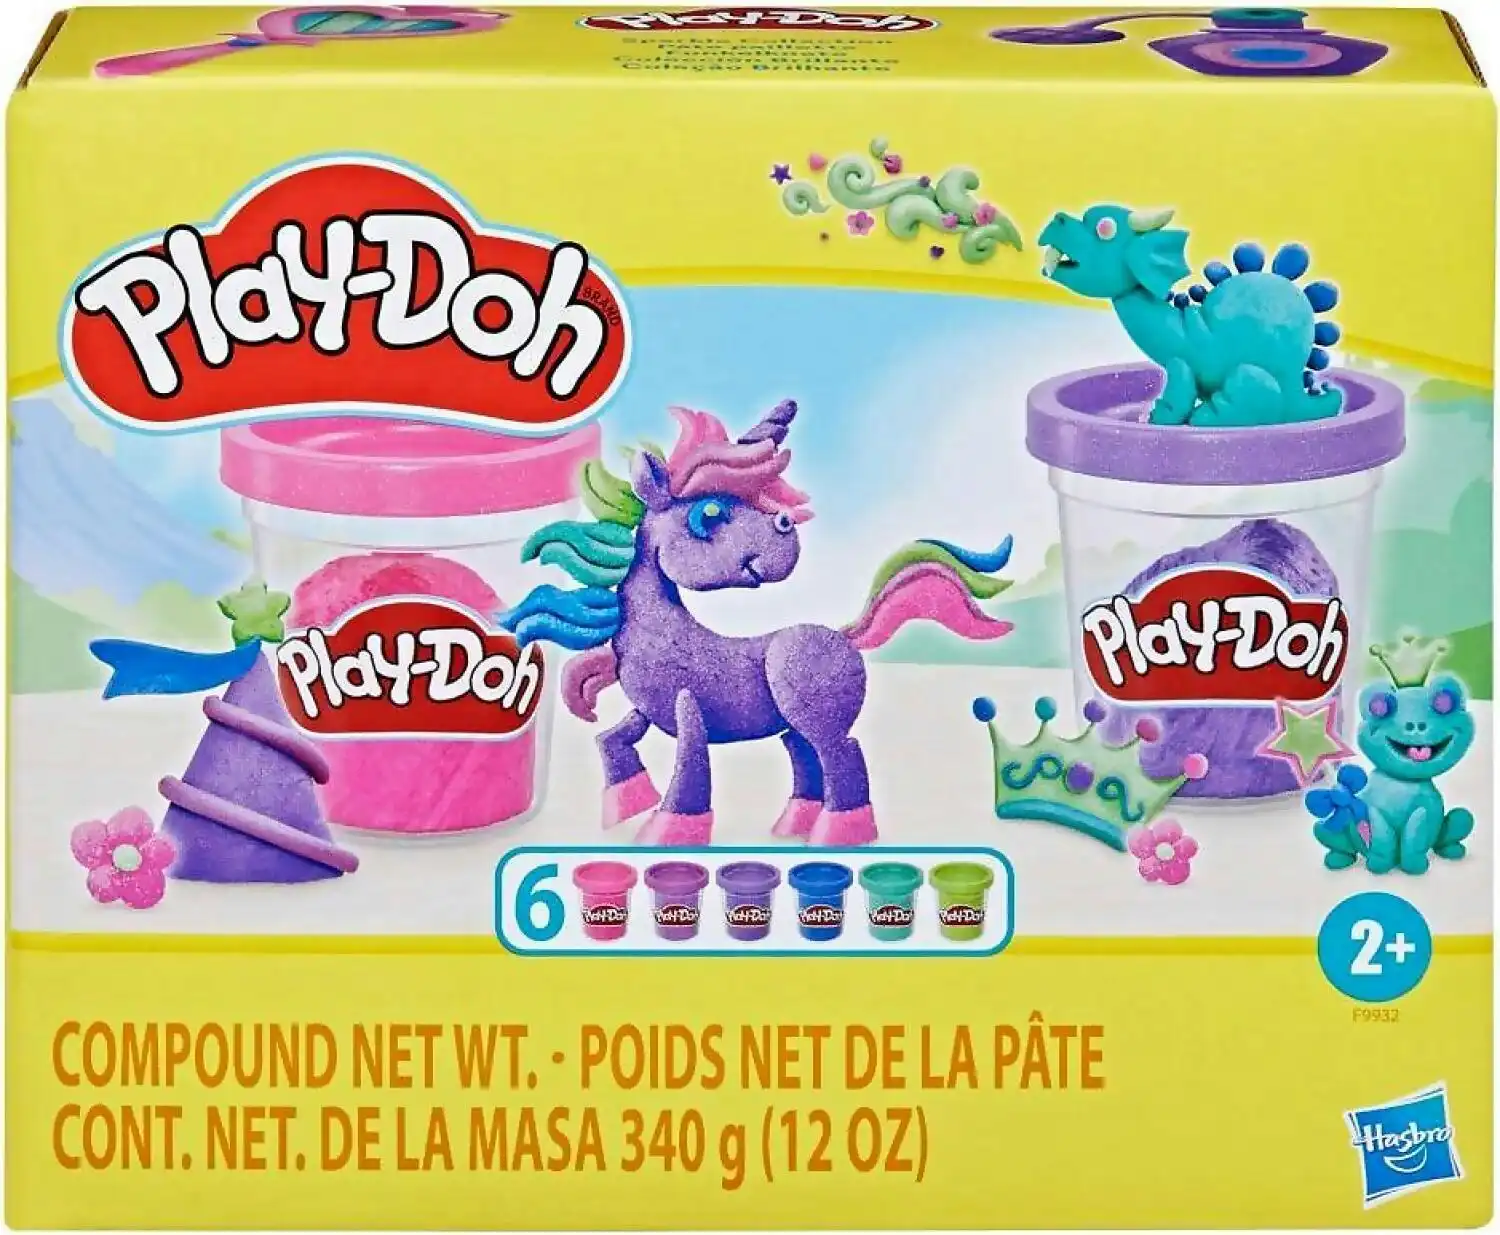 Play-doh - 6 Pack Sparkle Collection Arts And Crafts Toys - Hasbro